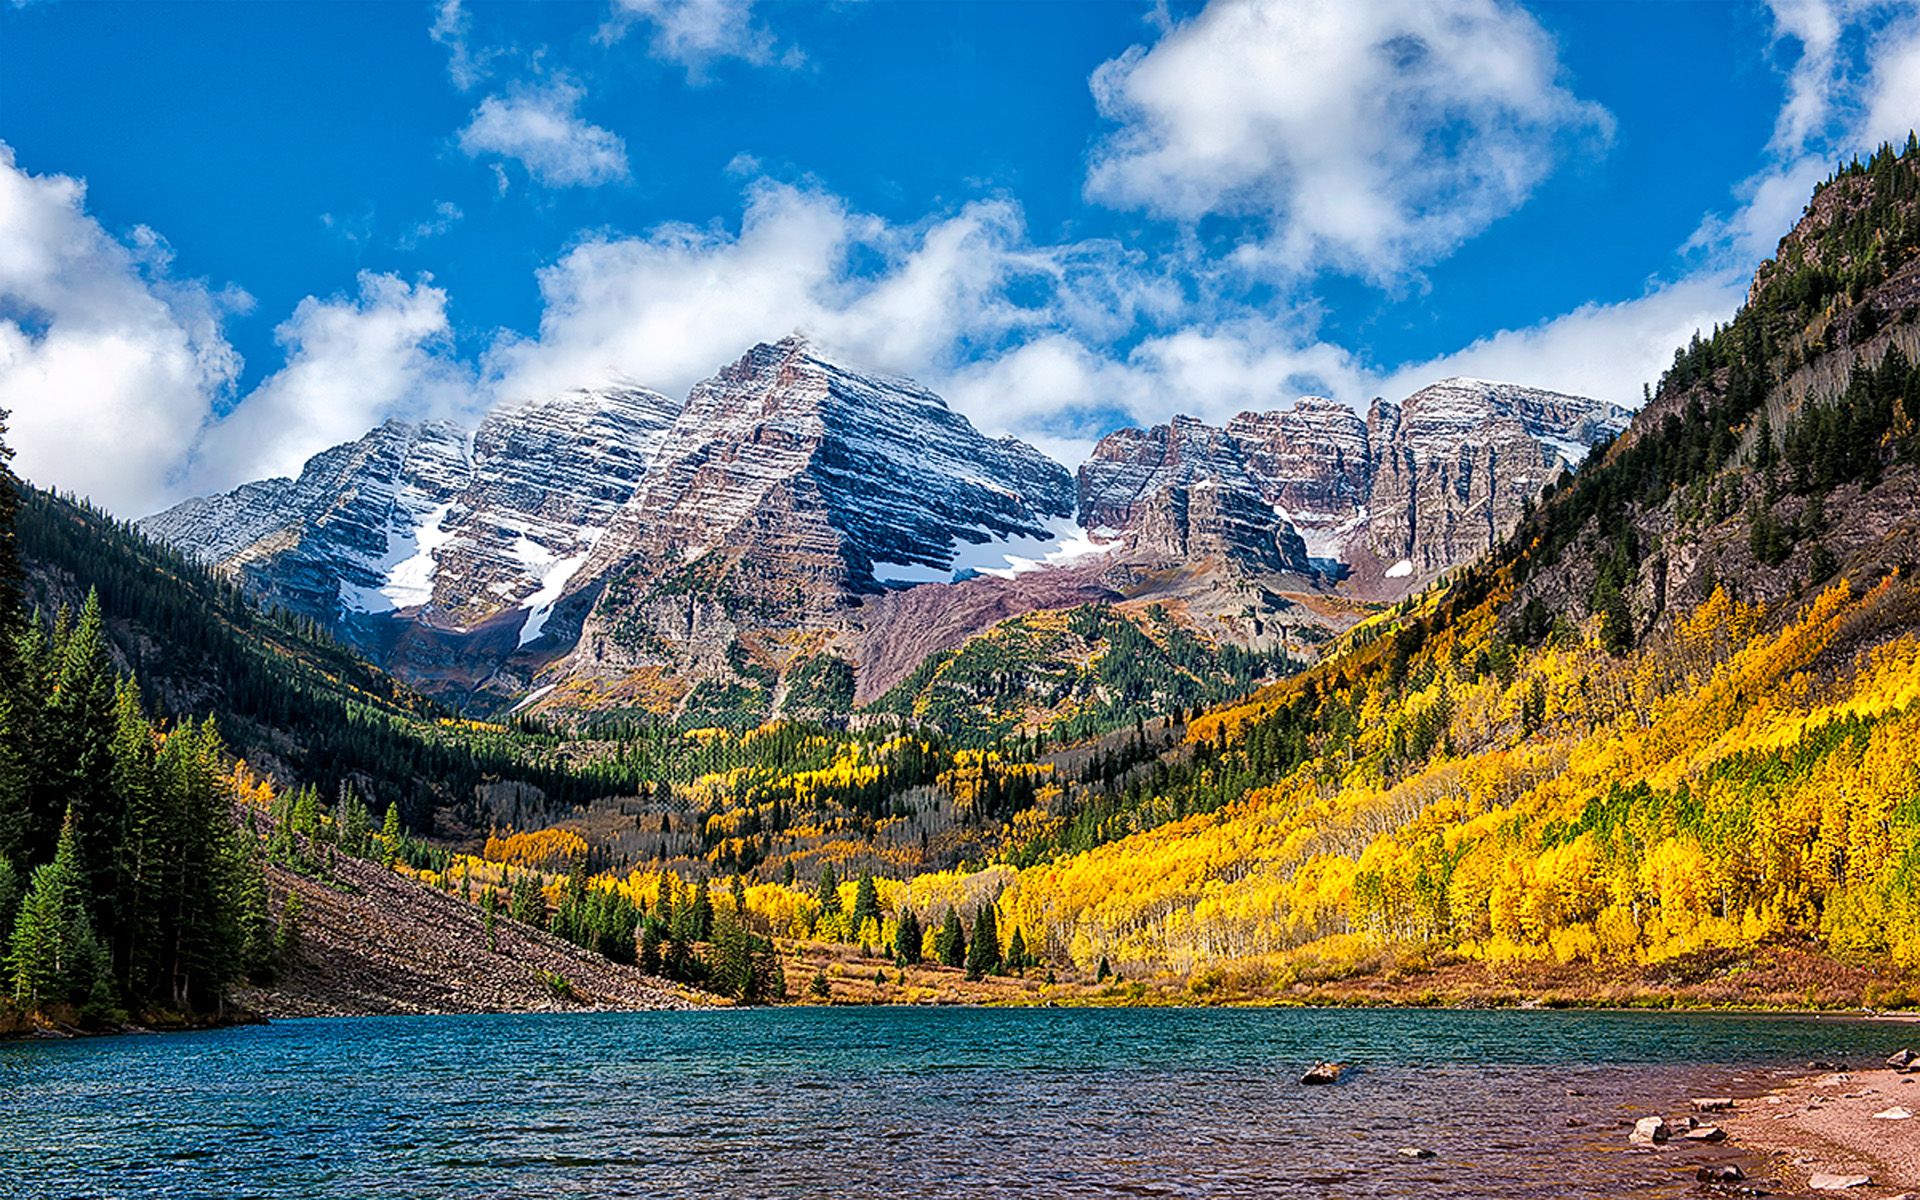 Wonderful Autumn Landscape Mountain Lake Birch And Pine Forest With Yellow And Green Leaves, Rocky Mountains With Snow Blue With White Clouds Maroon Bells Elk Mountains Aspen Colorado, Wallpaper13.com